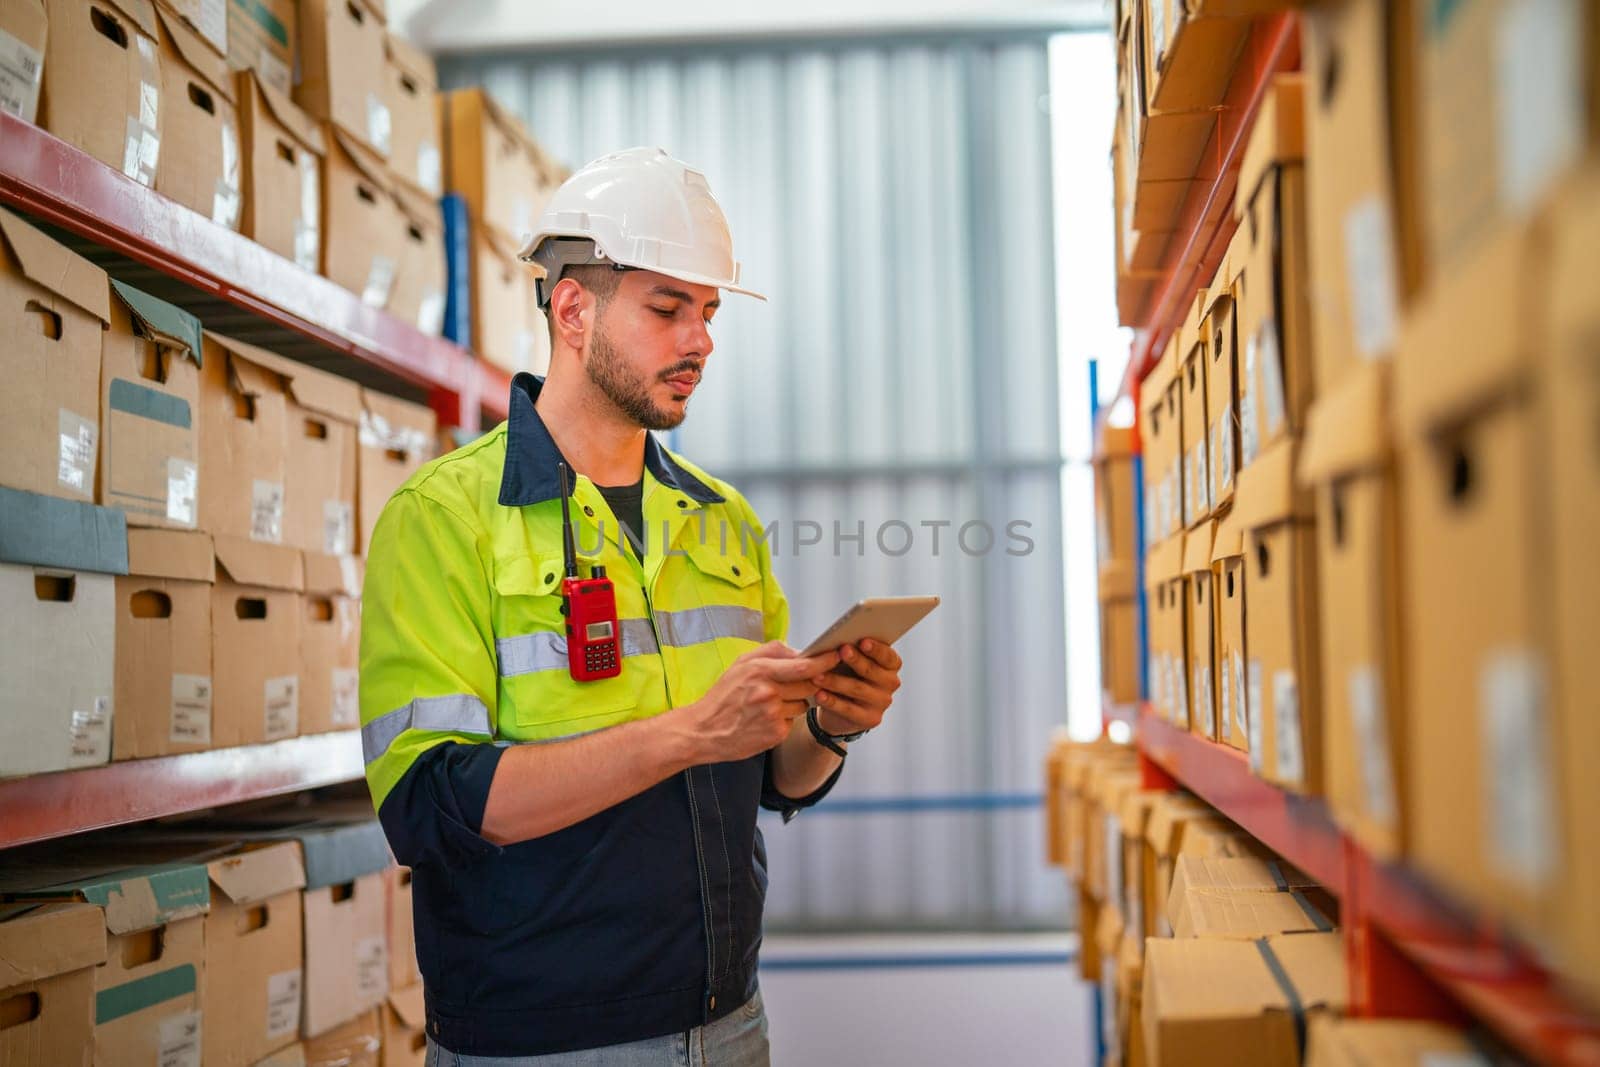 Professional warehouse worker hold tablet and check the product on shelves in workplace. The concept of good system support the worker for stock and shipment factory industry. by nrradmin